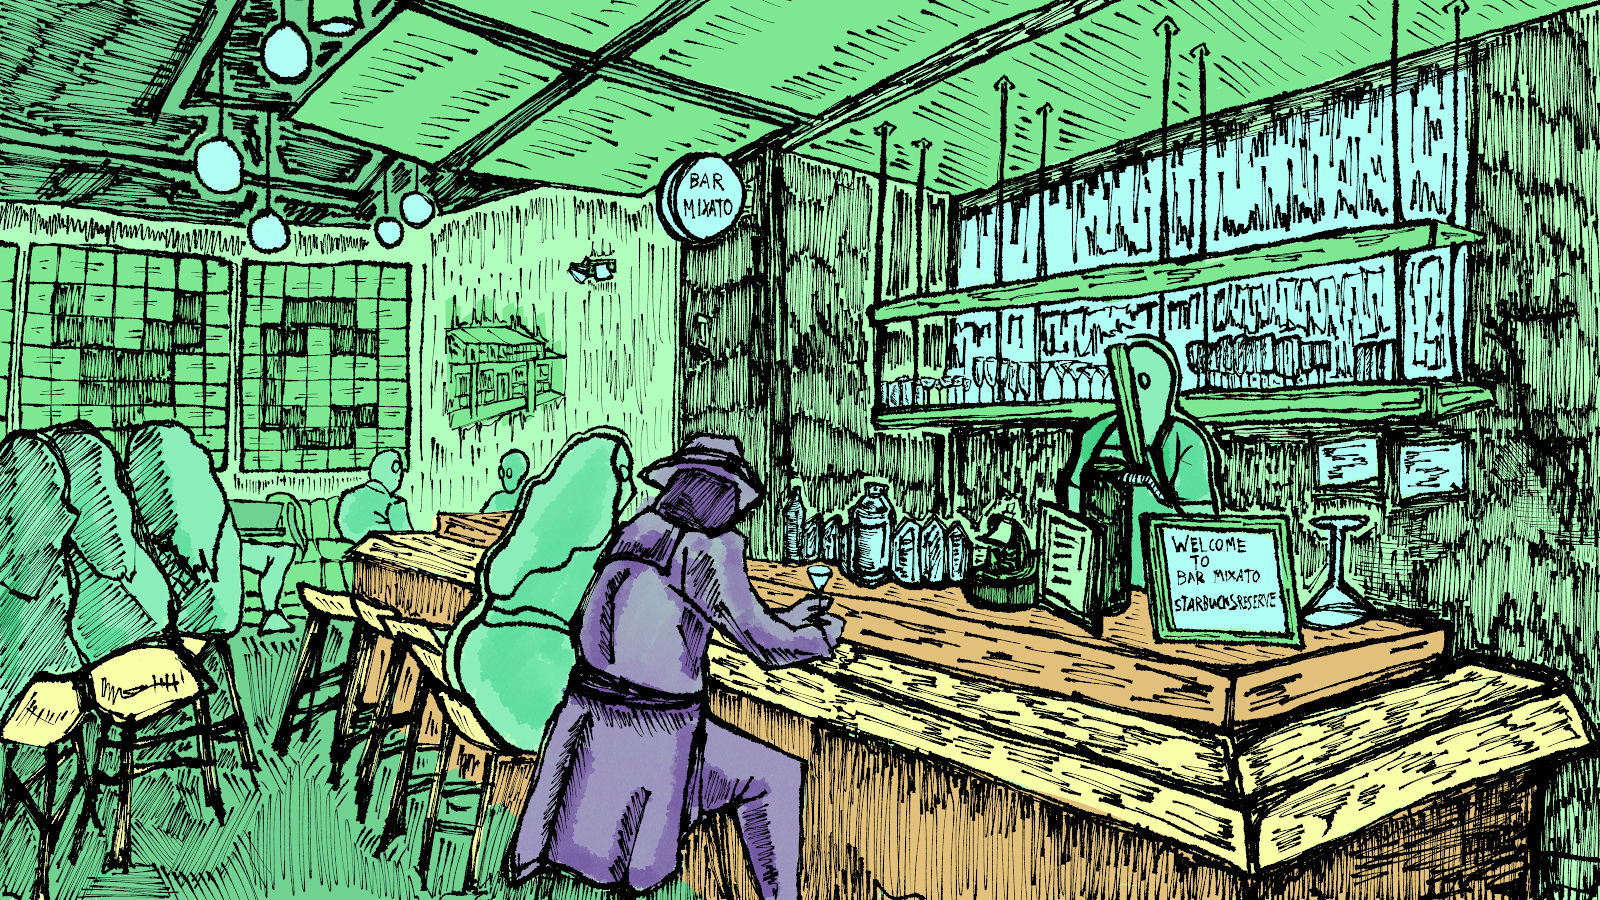 A primarily green illustration of the inside of the Starbucks Reserve bar area. A mysterious purple figure in a hat and trench coat sits at the bar with a martini glass in hand.